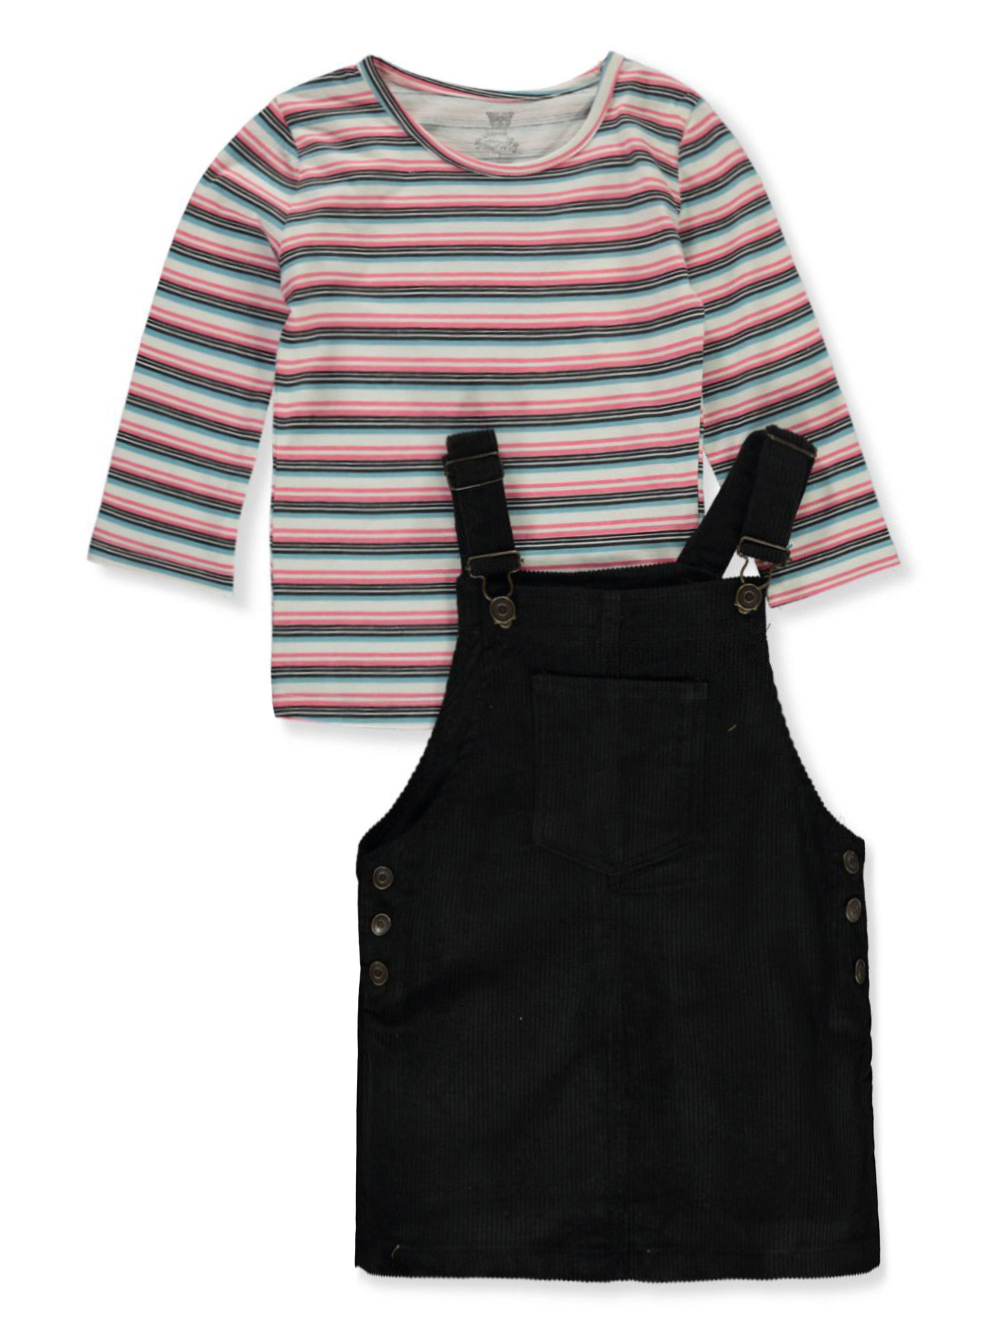 Overalls and Jumpers Corduroy Skirtalls